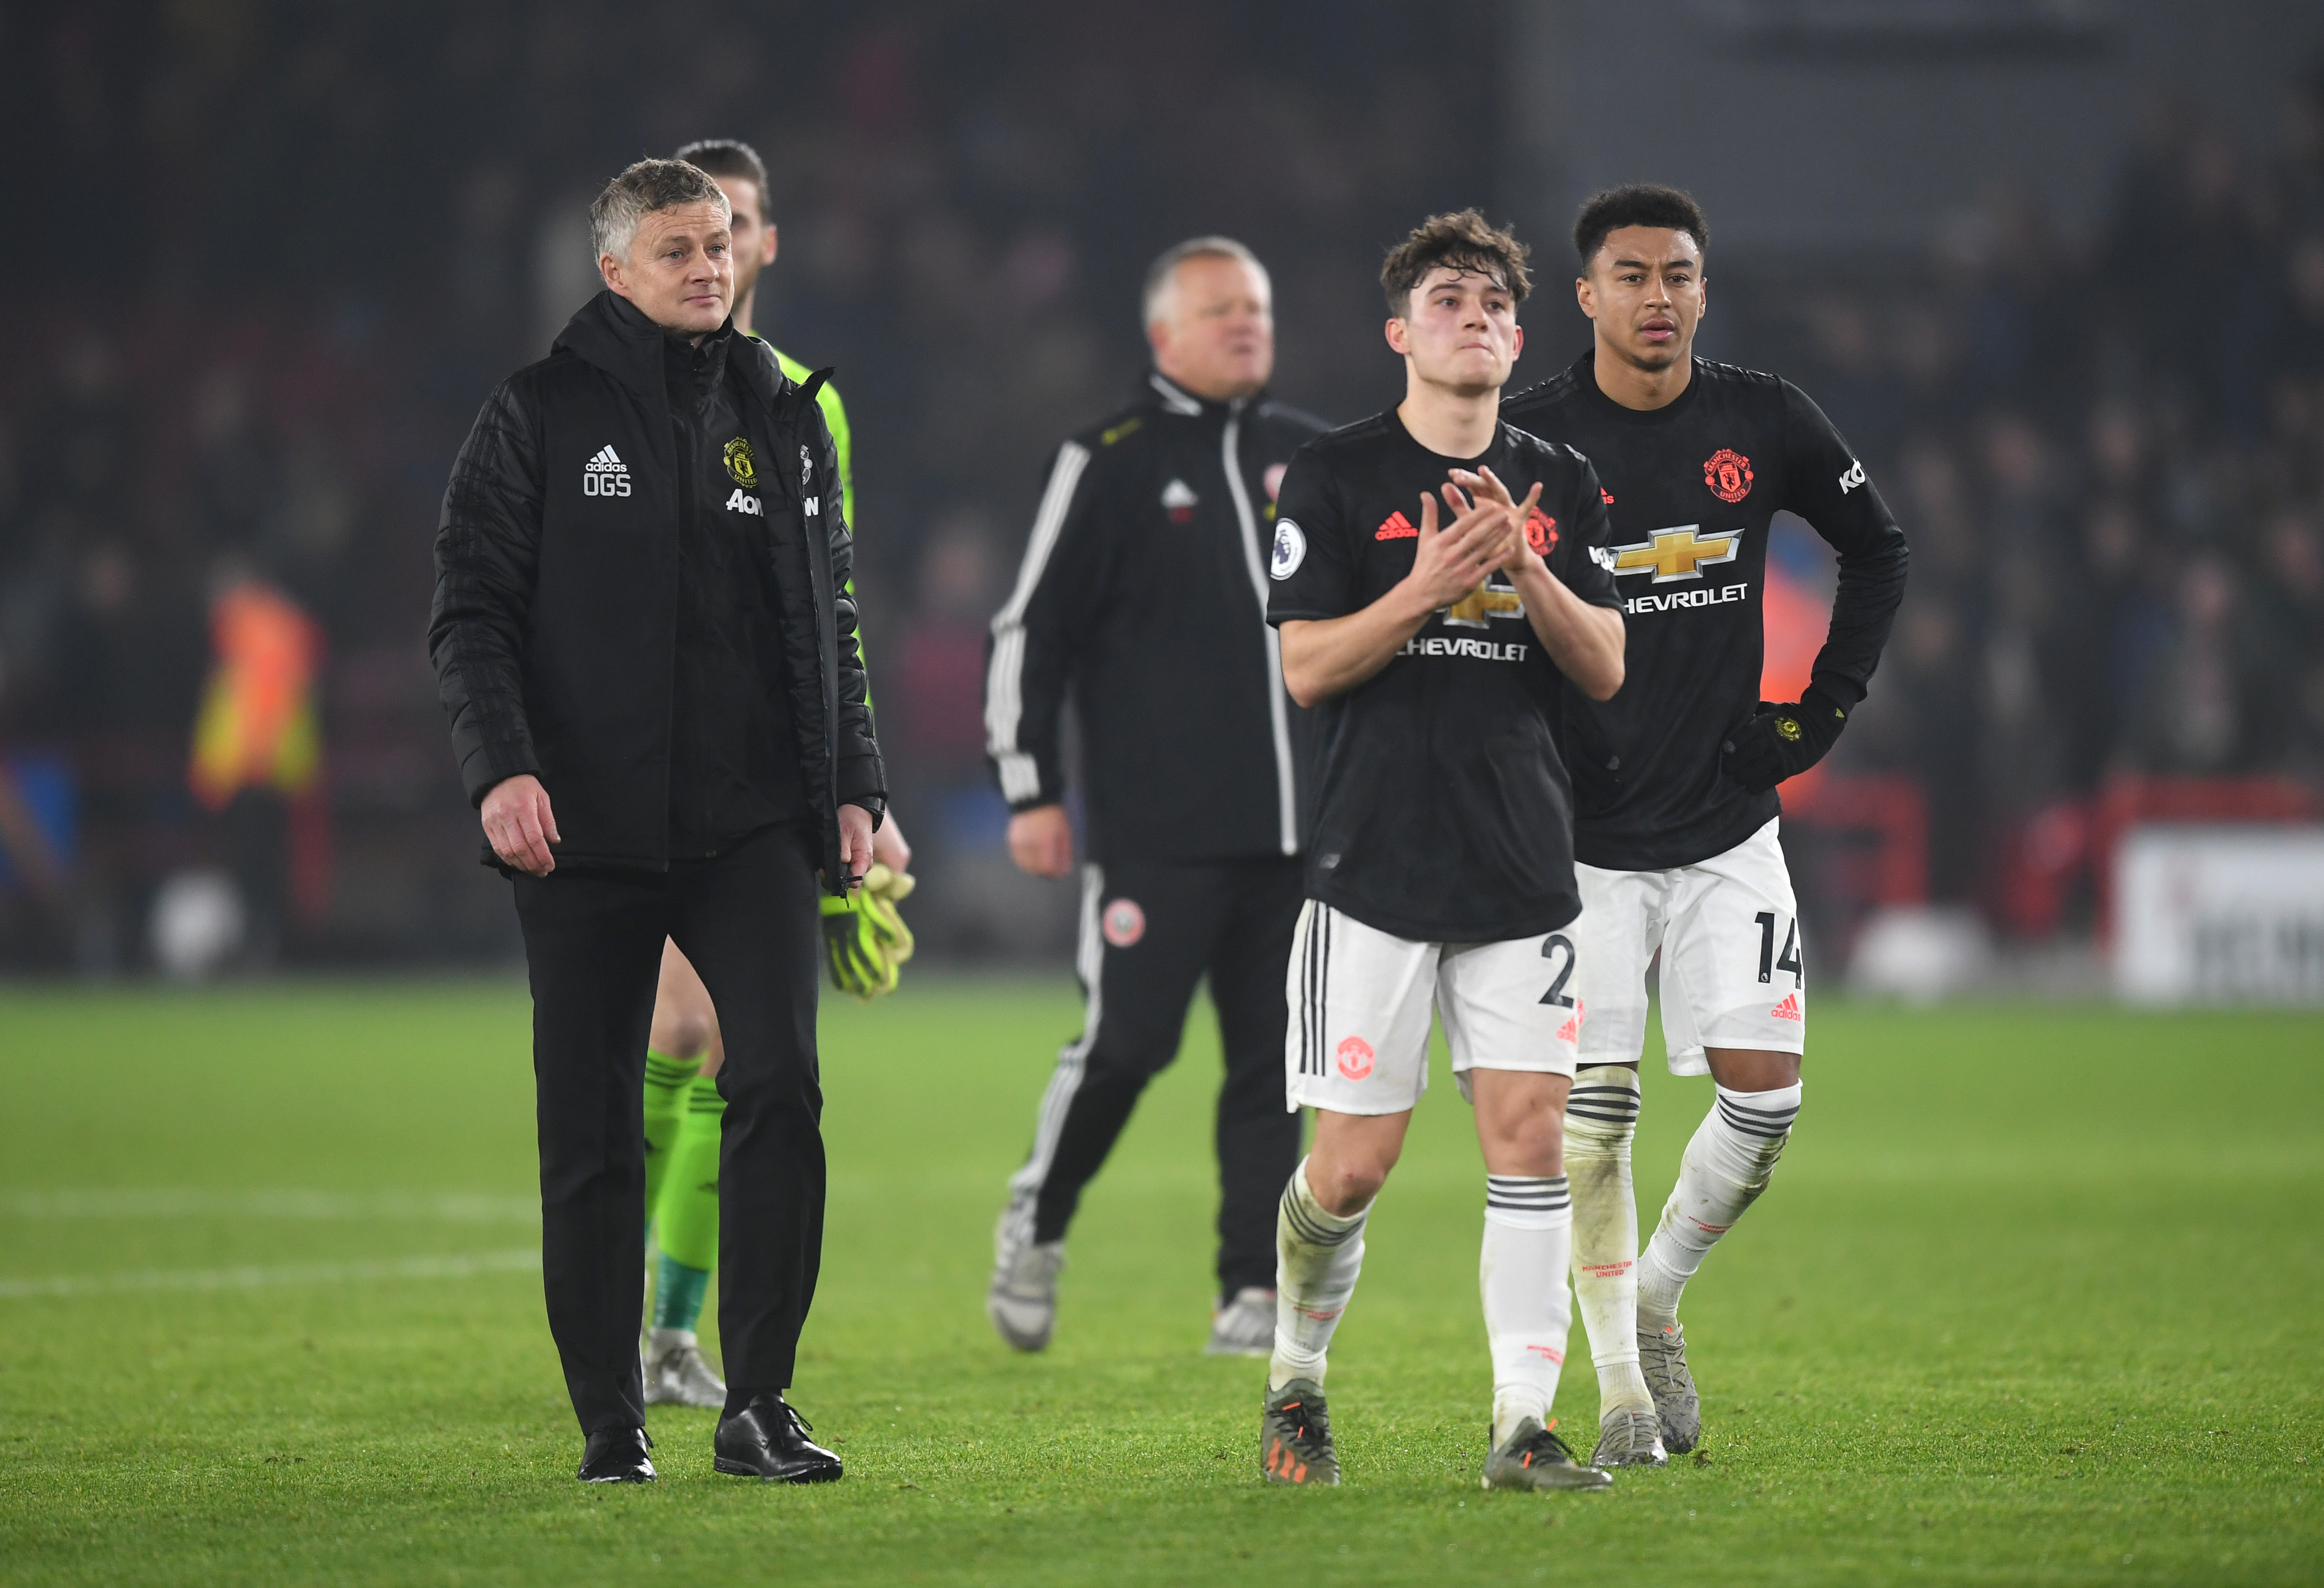 SHEFFIELD, ENGLAND - NOVEMBER 24: Ole Gunnar Solskjaer, Manager of Manchester United, Jesse Lingard and Daniel James of Manchester United acknowledge the fans following the Premier League match between Sheffield United and Manchester United at Bramall Lane on November 24, 2019 in Sheffield, United Kingdom. (Photo by Michael Regan/Getty Images)